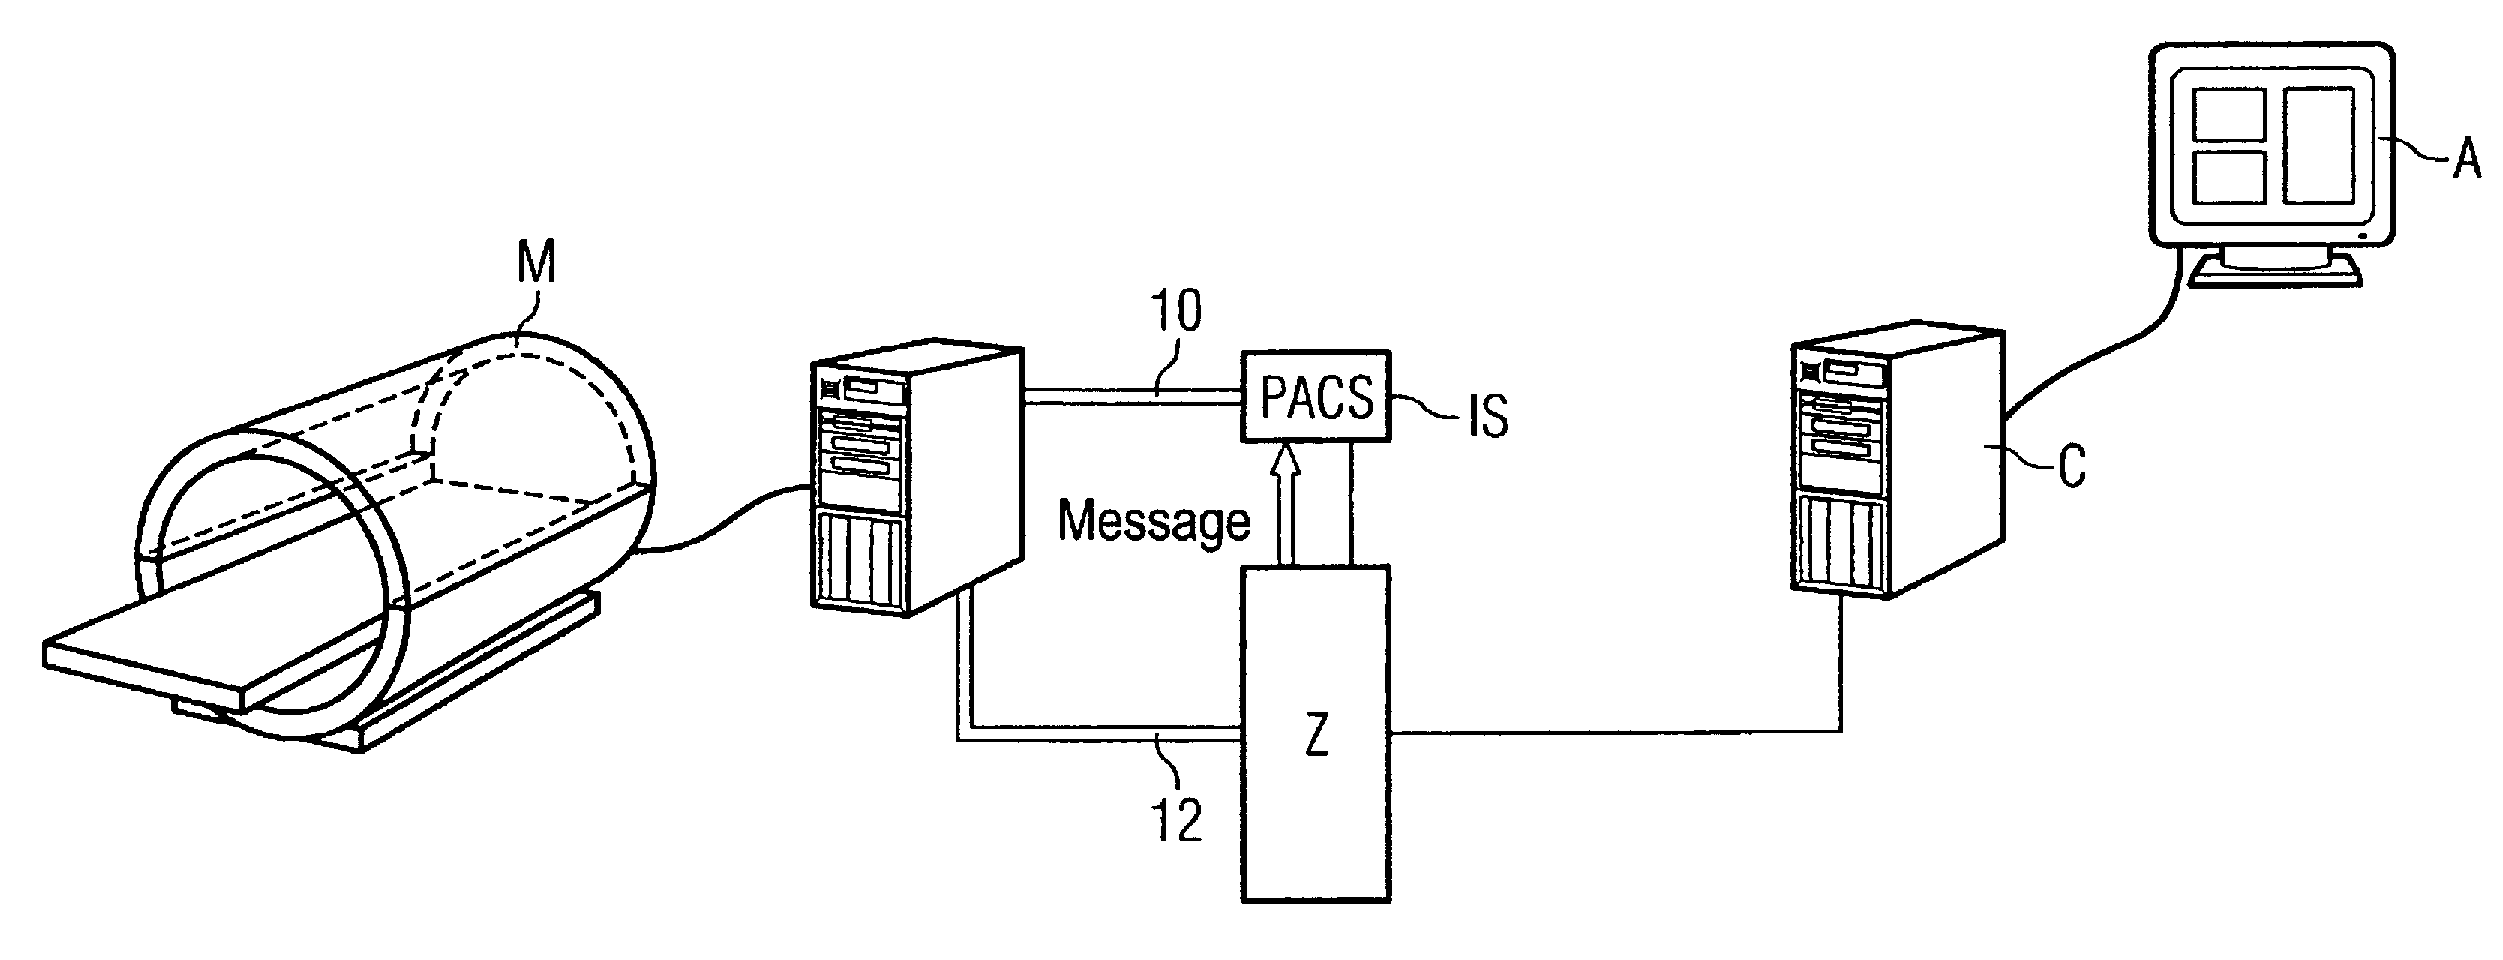 Method and system for provision of image data from a server to a client